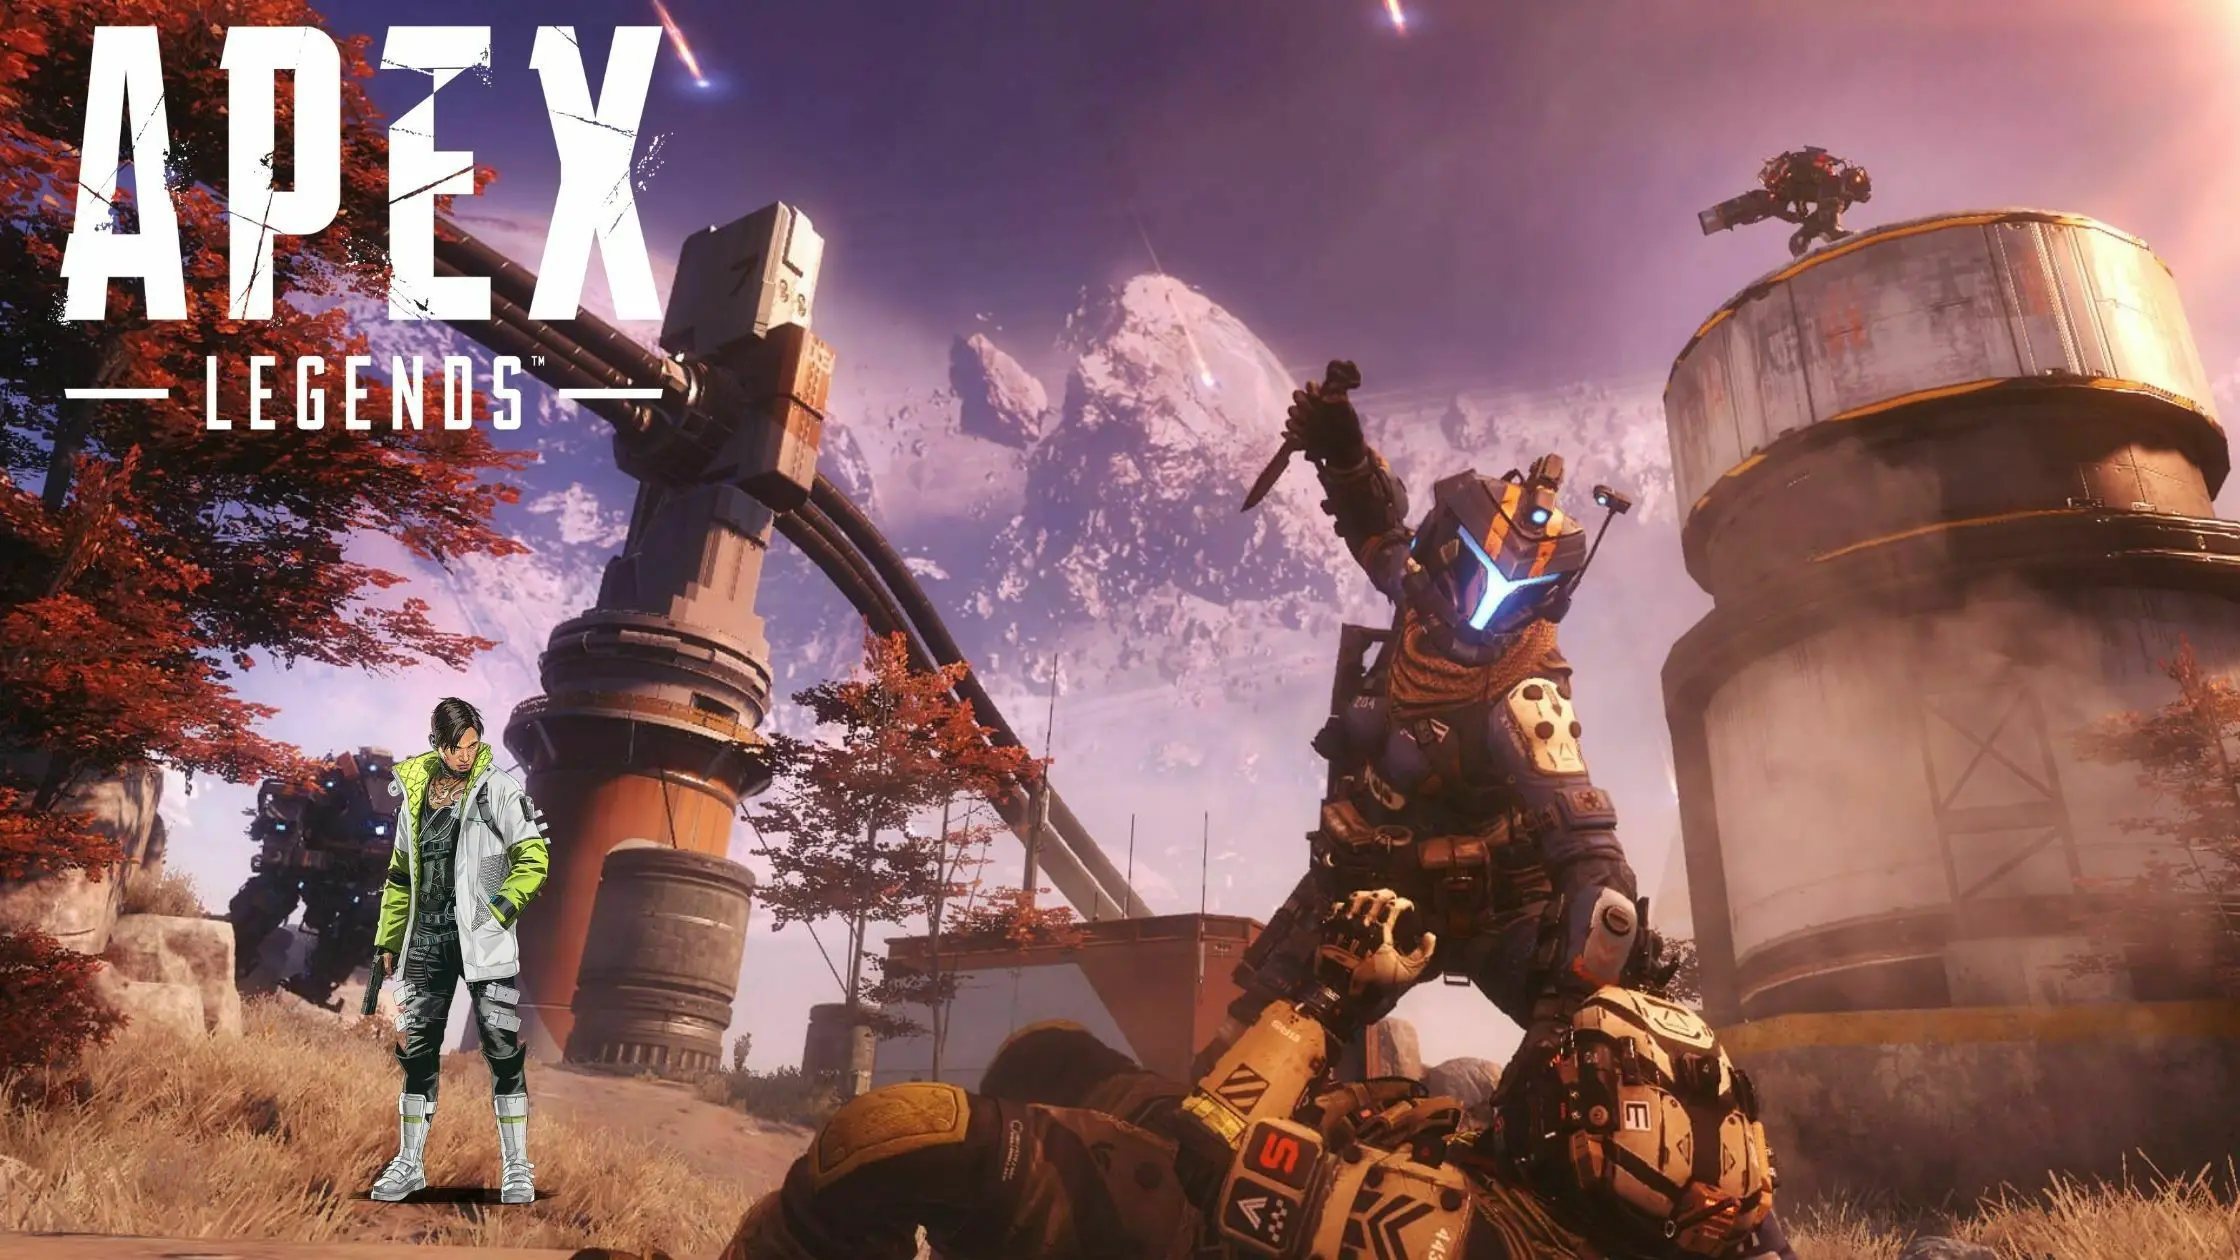 titanfall-is-returning-to-apex-legends-in-season9-says-developers